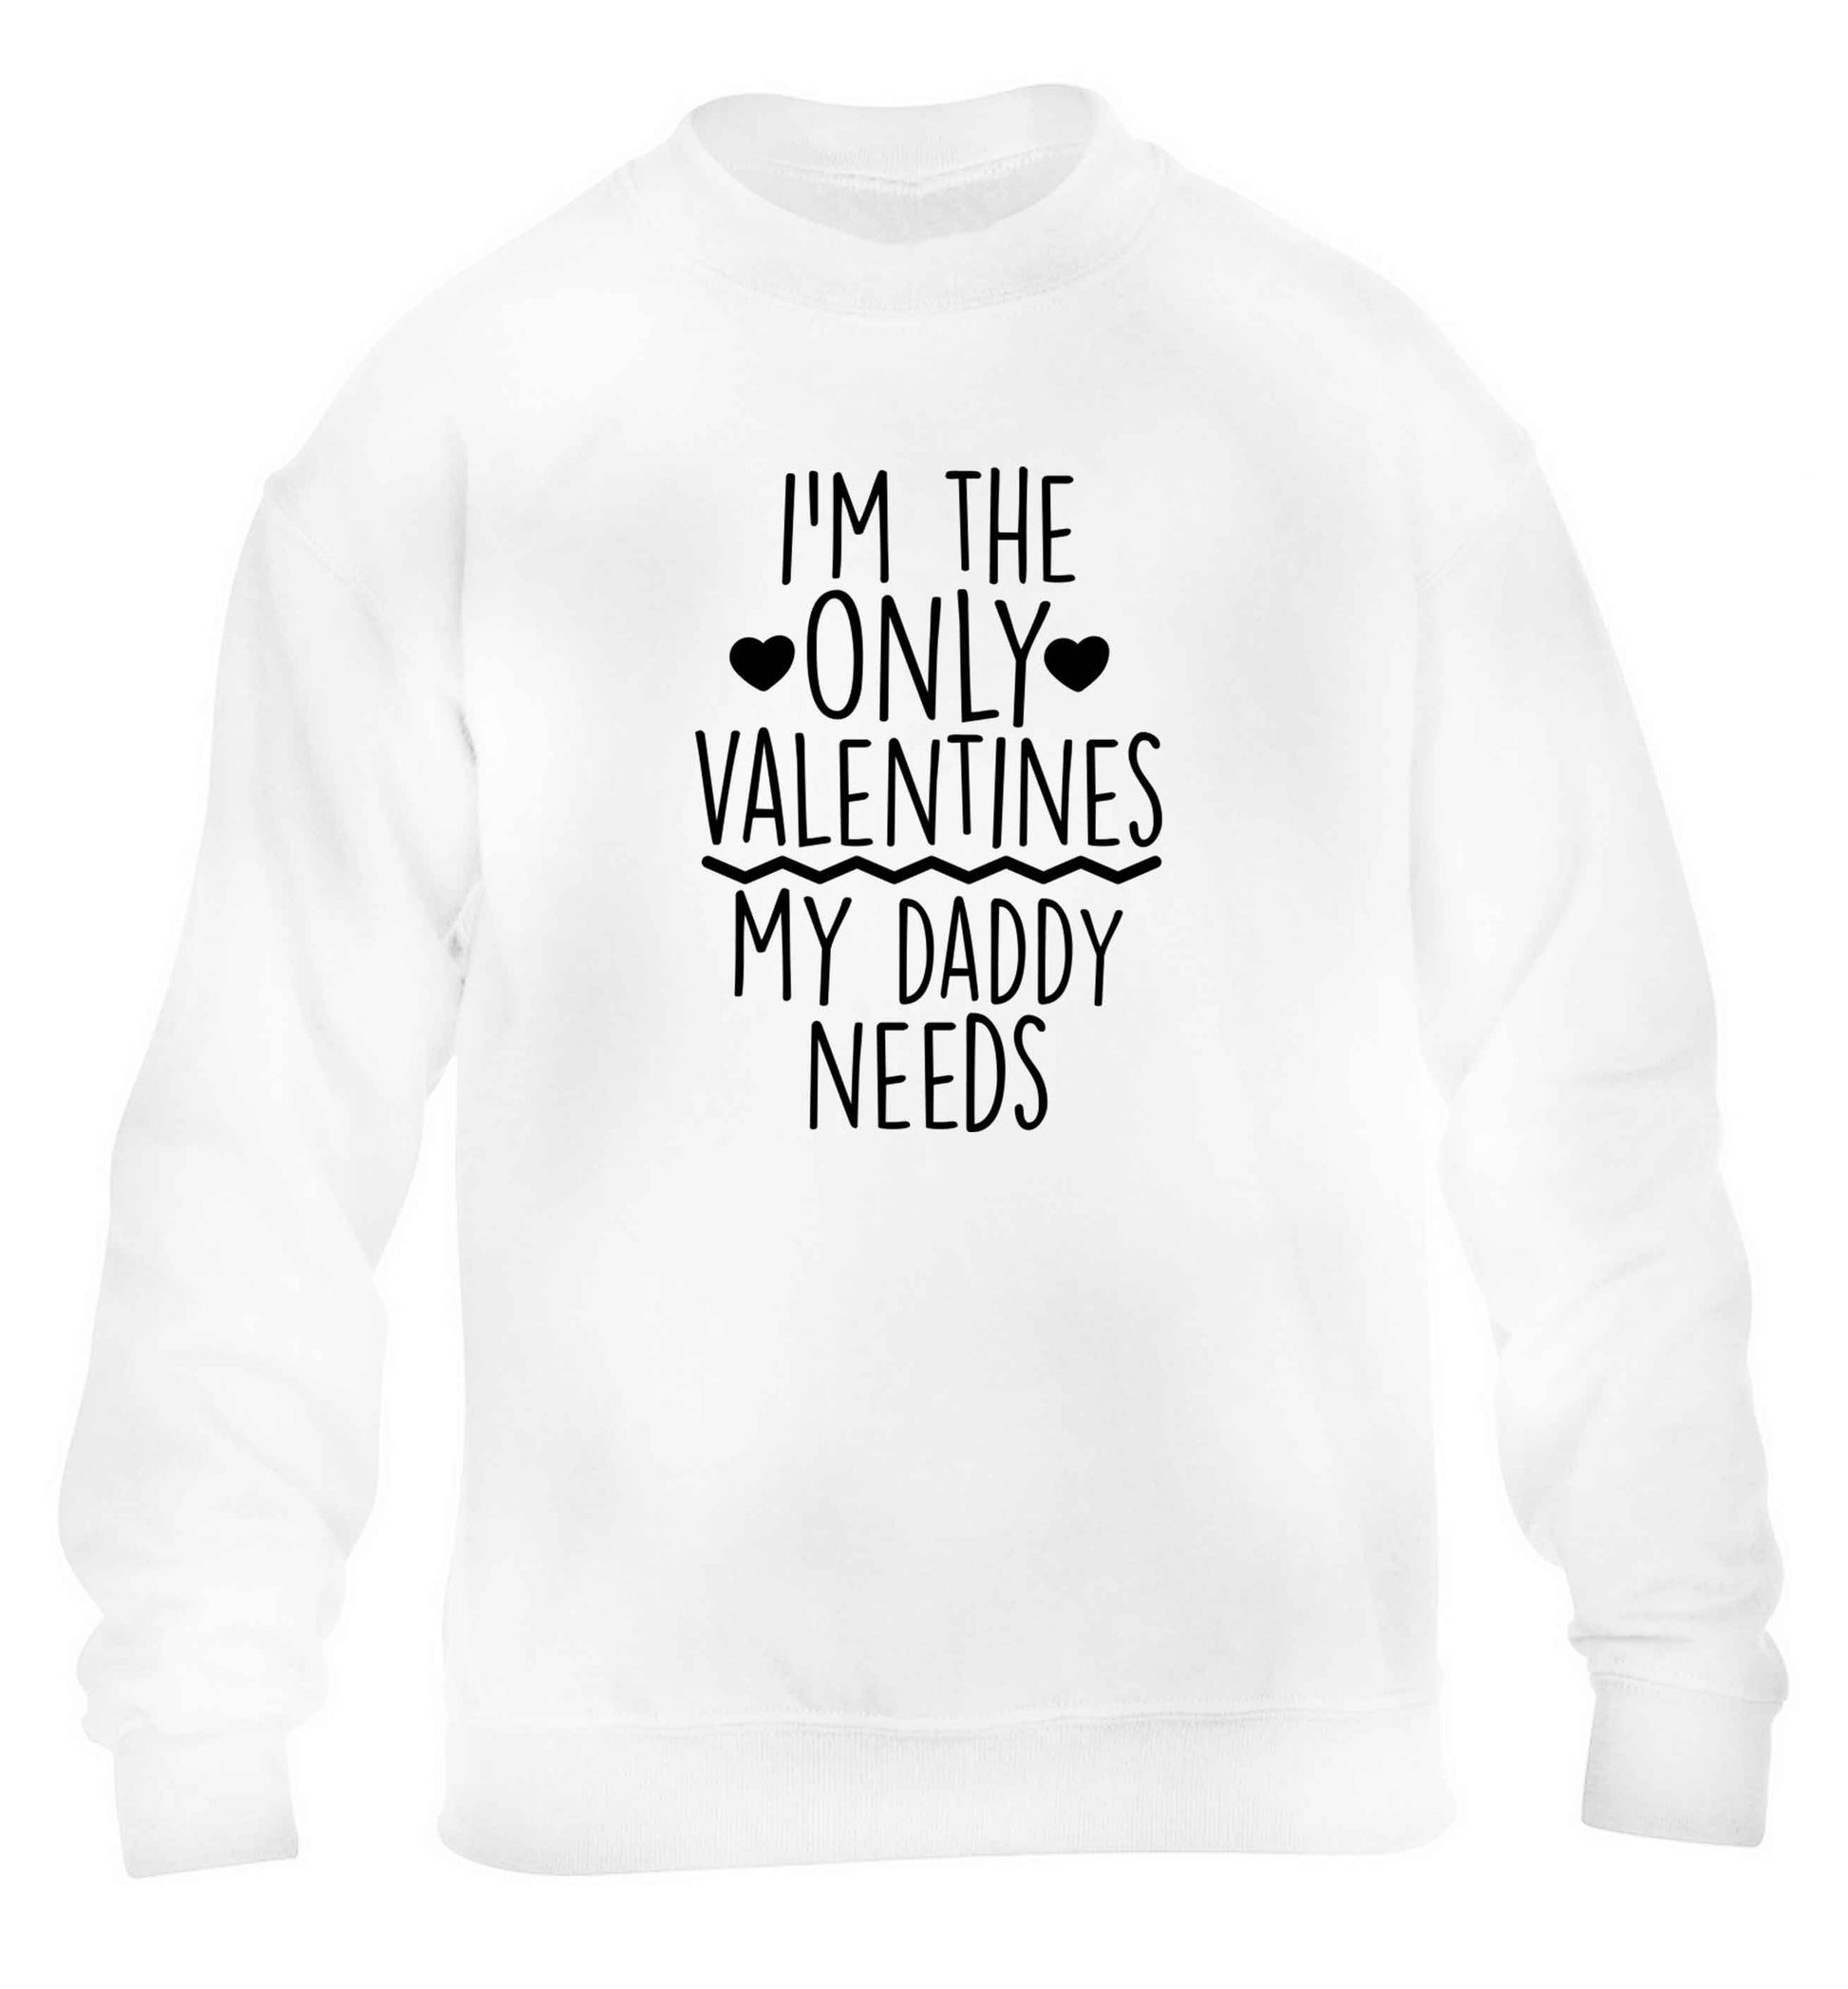 I'm the only valentines my daddy needs children's white sweater 12-13 Years